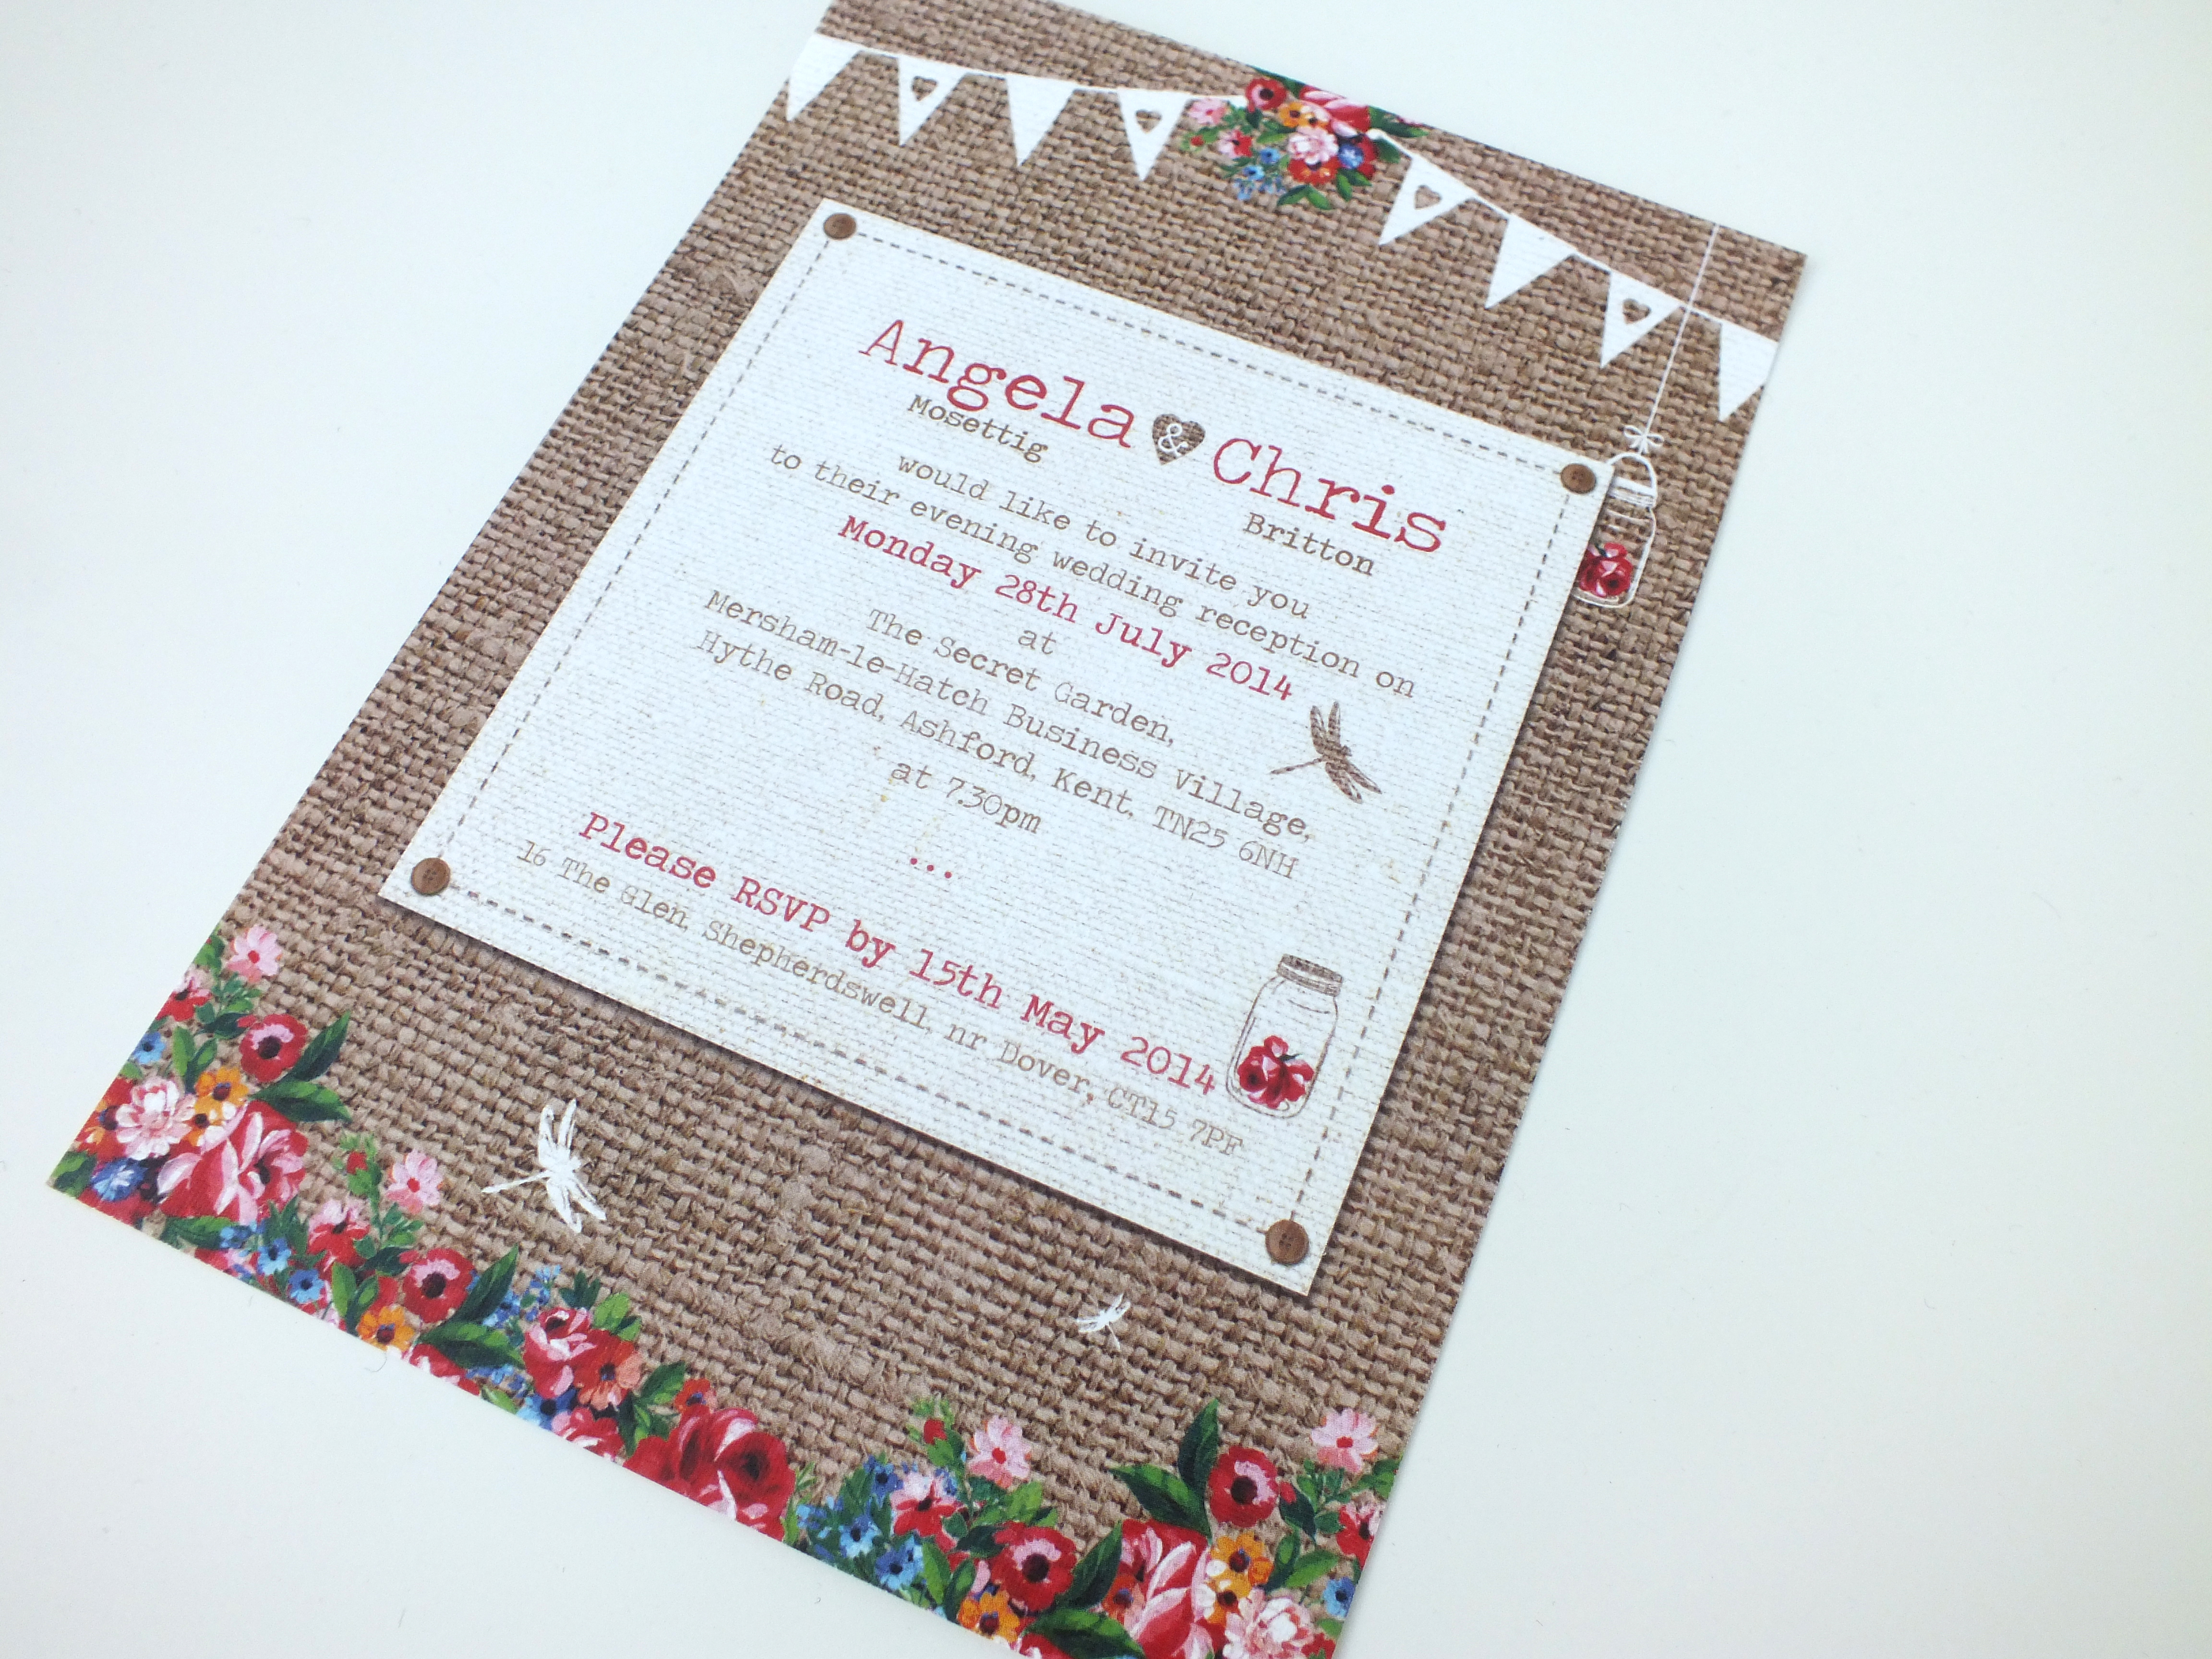 Hessian wedding invite with flowers and bunting